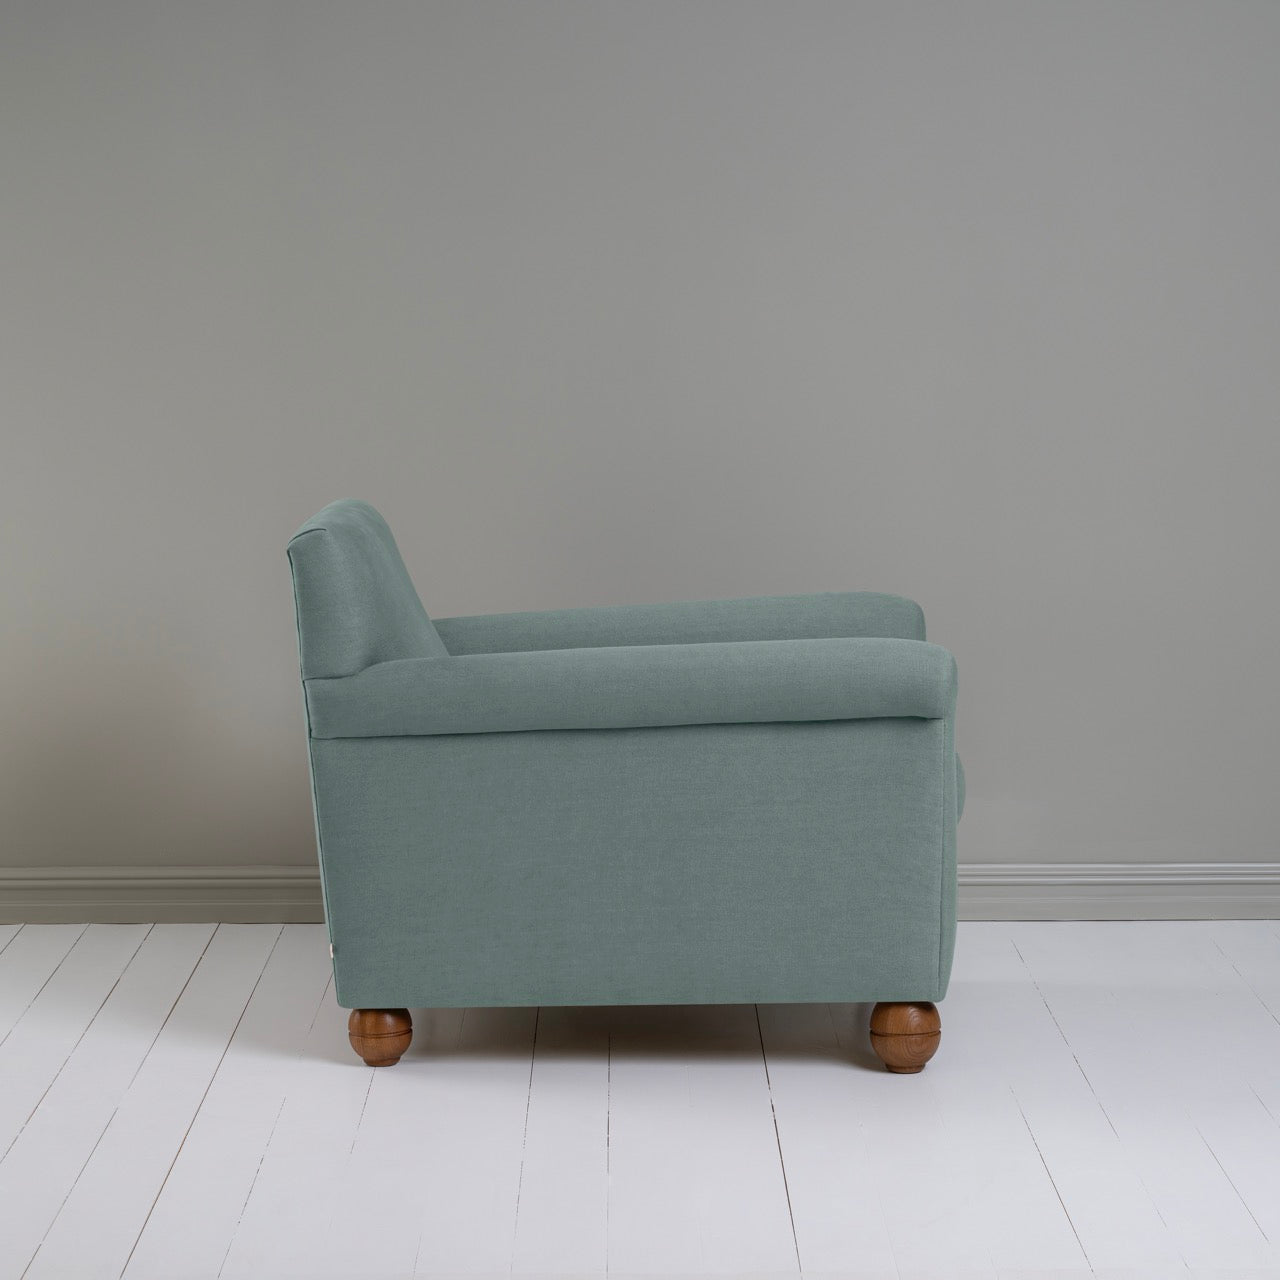 Idler Armchair in Laidback Linen Mineral